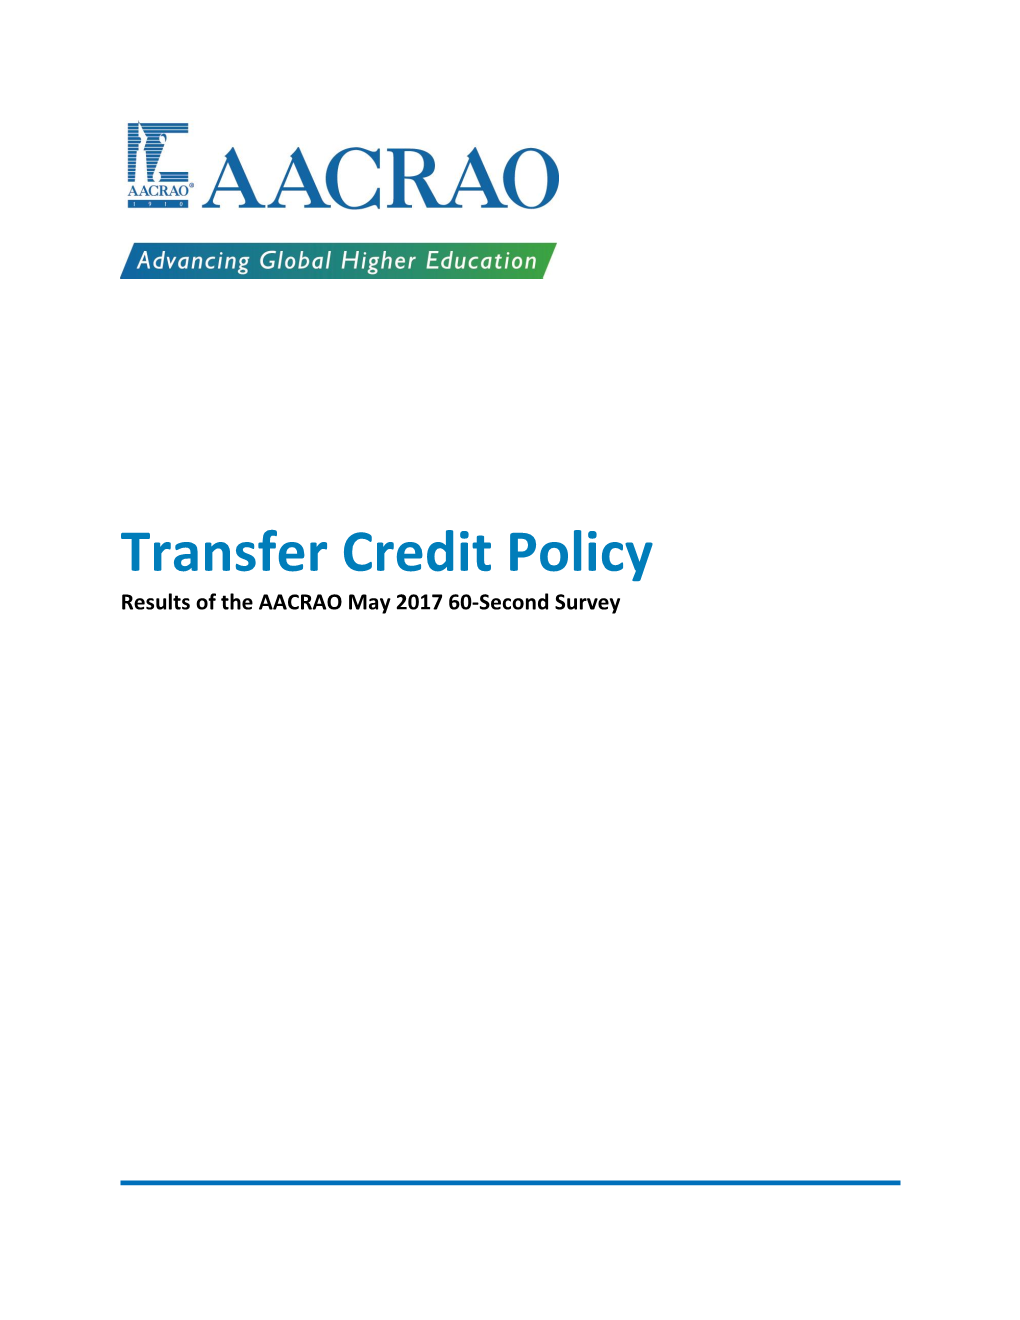 Transfer Credit Policy Results of the AACRAO May 2017 60-Second Survey